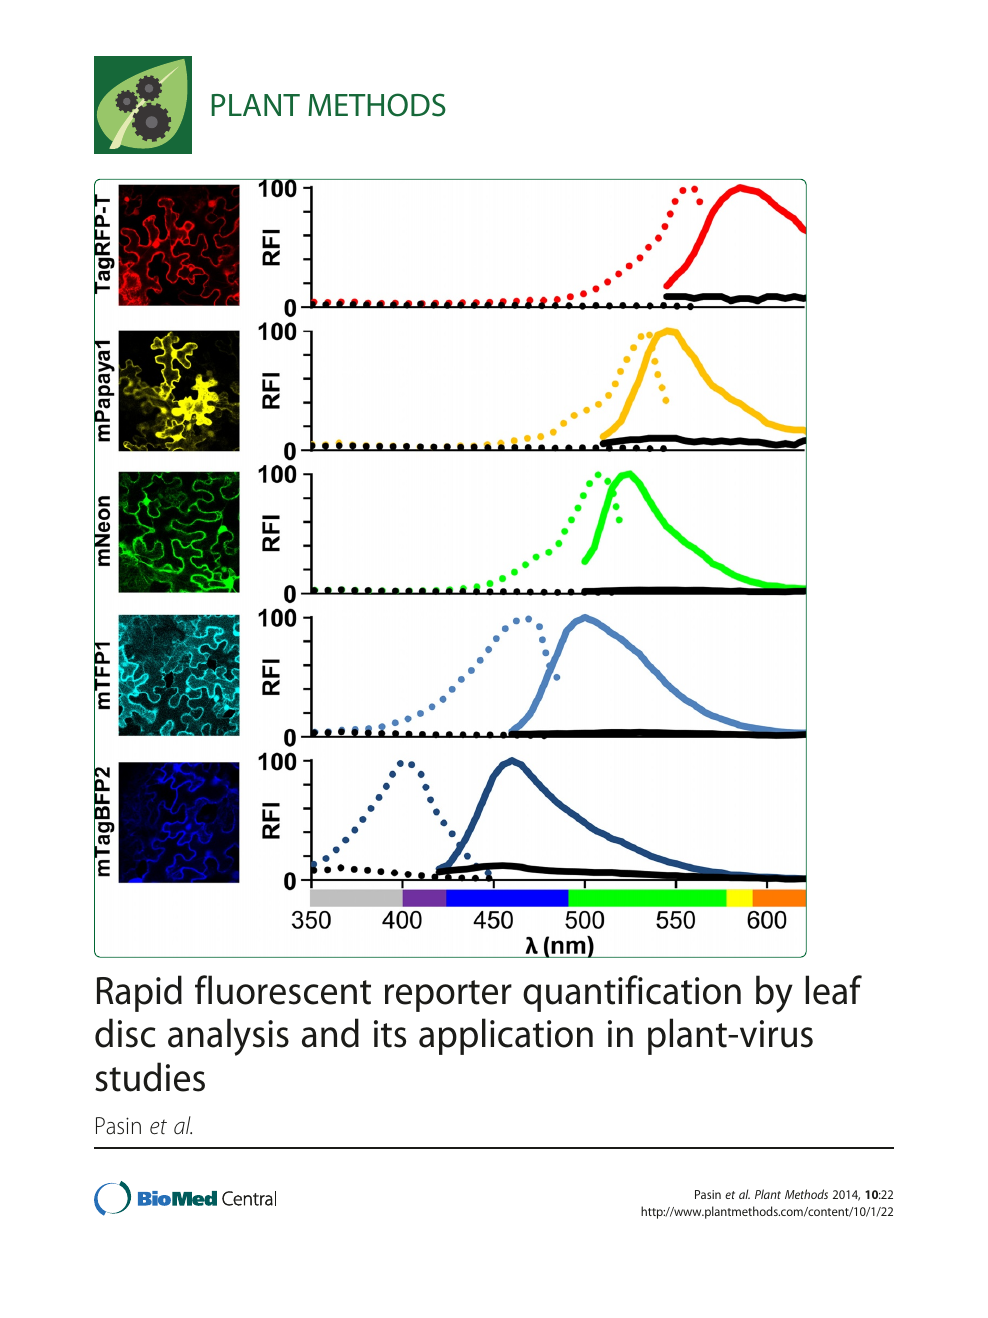 Immagini Natalizie 400 X 150 Pixel.Rapid Fluorescent Reporter Quantification By Leaf Disc Analysis And Its Application In Plant Virus Studies Topic Of Research Paper In Biological Sciences Download Scholarly Article Pdf And Read For Free On Cyberleninka